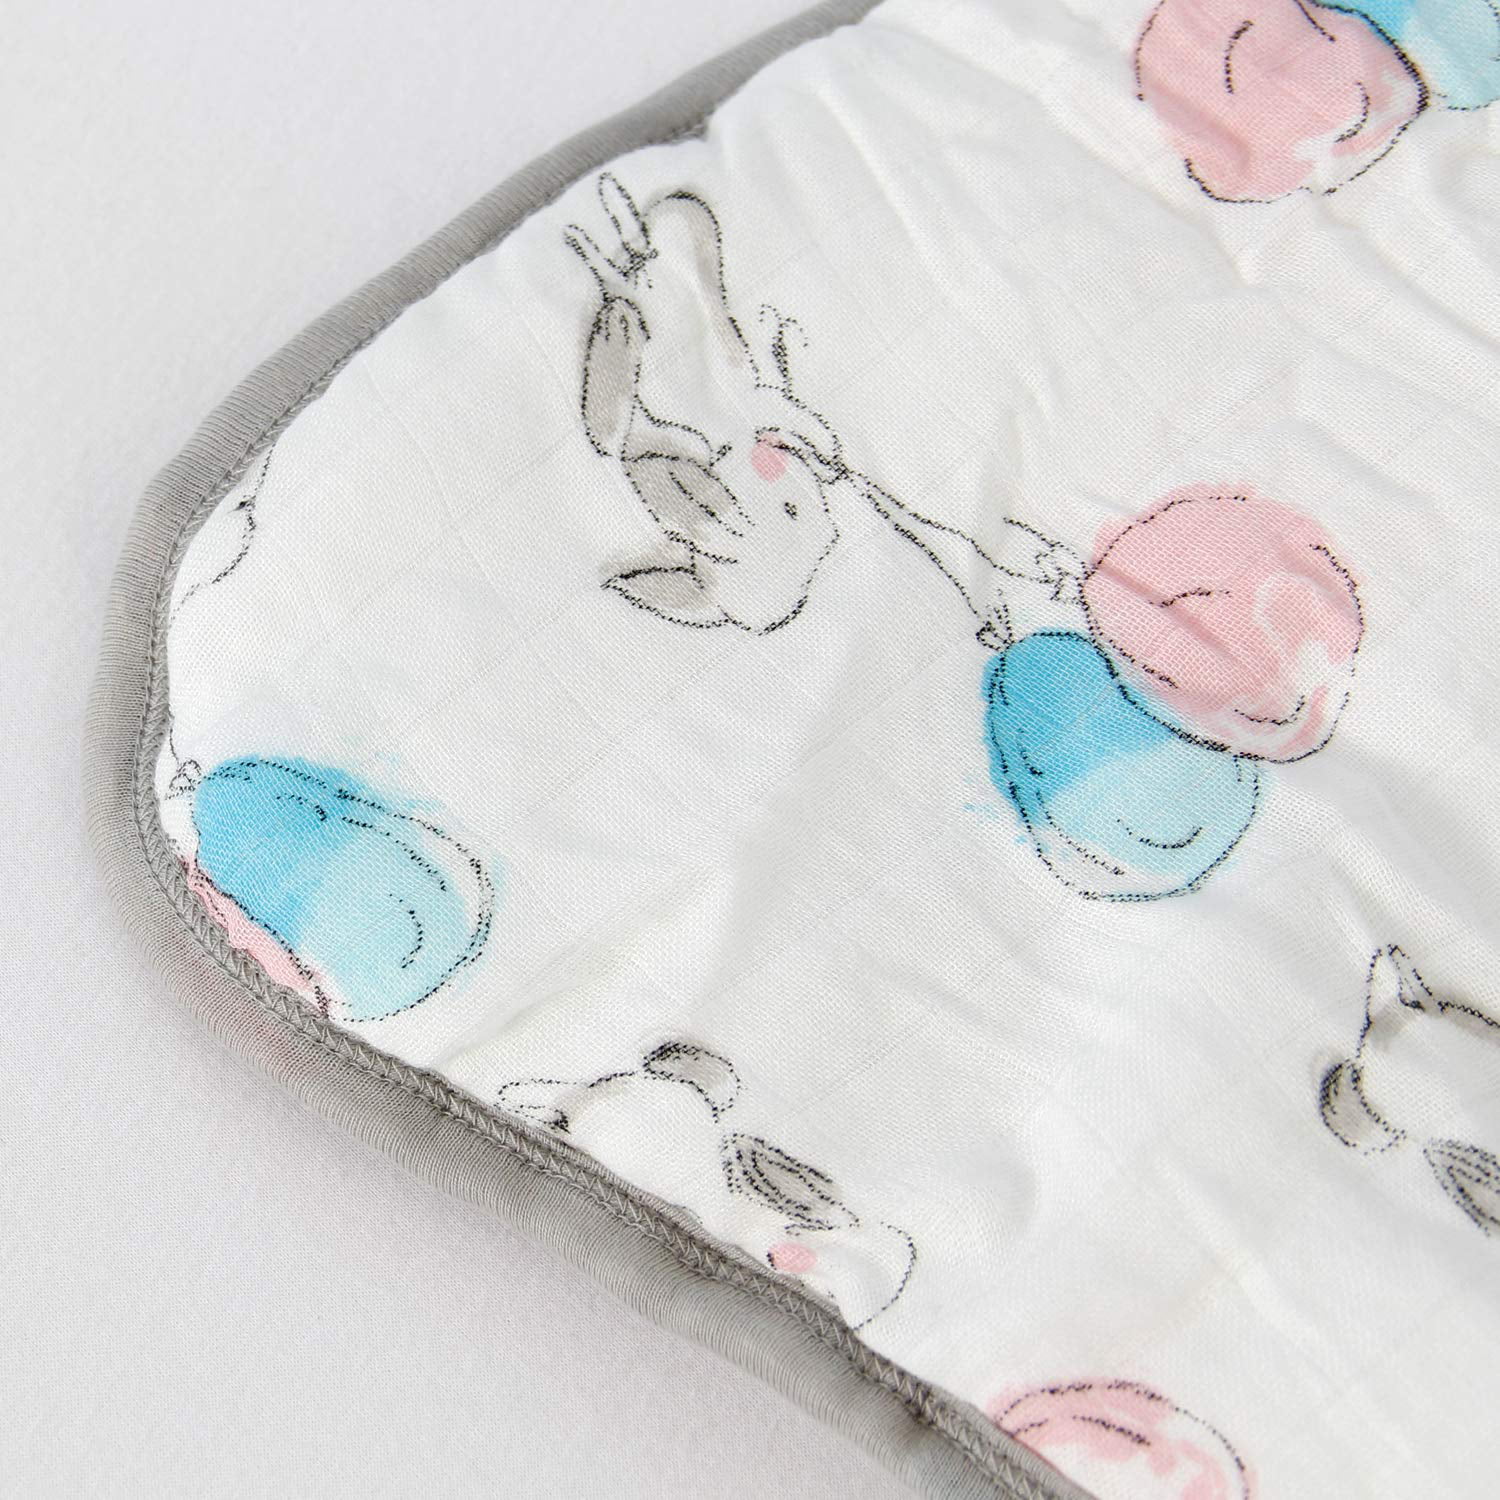 Molis & co Premium Muslin Baby Sleeping Bag and Sack, 2.5 TOG,Super Soft  and Warm Unisex Wearable Blanket, 18-36 Months. 35.8, Ideal for Winter.  Unisex Bunny and Balloons Print in Blue 